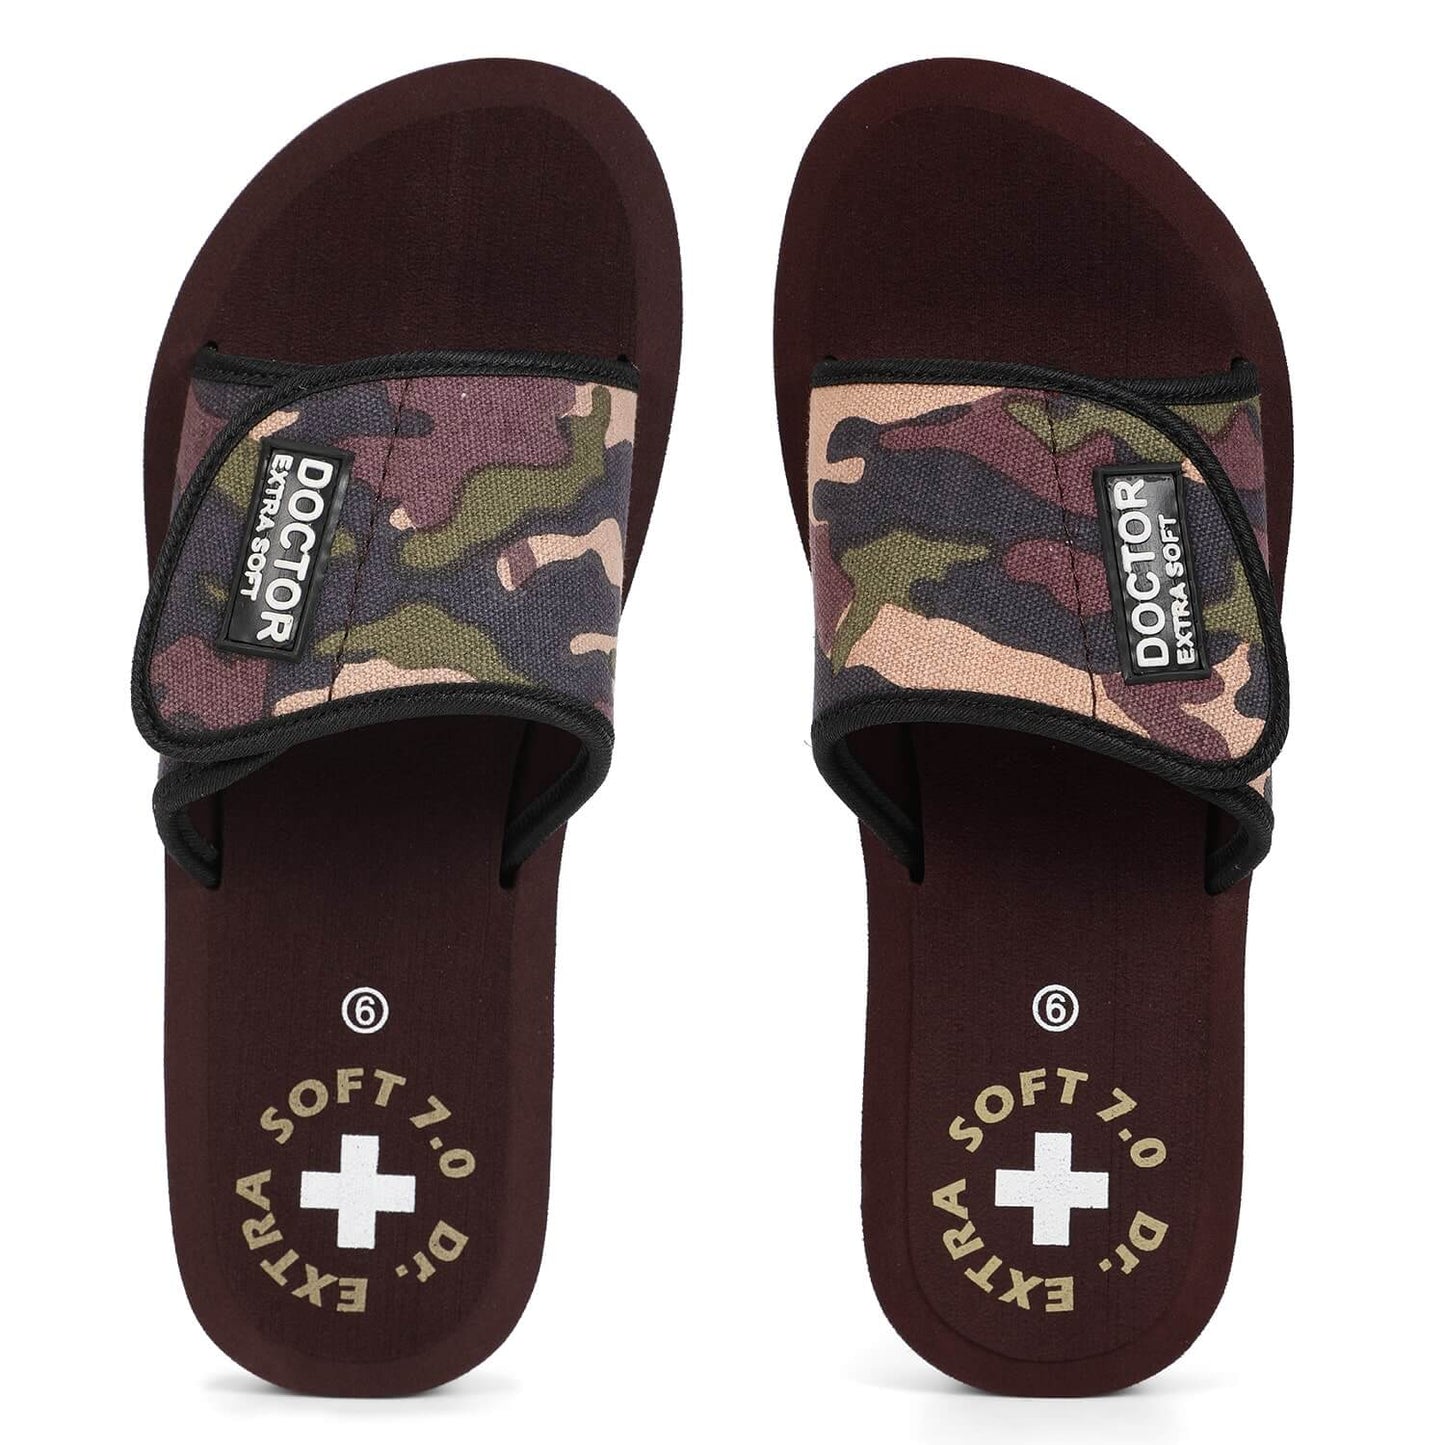 DOCTOR EXTRA SOFT D-54 Women's Camo Slippers Comfortable For Pregnancy Swelling With Adjustable Velcro Straps Camouflaged Sliders